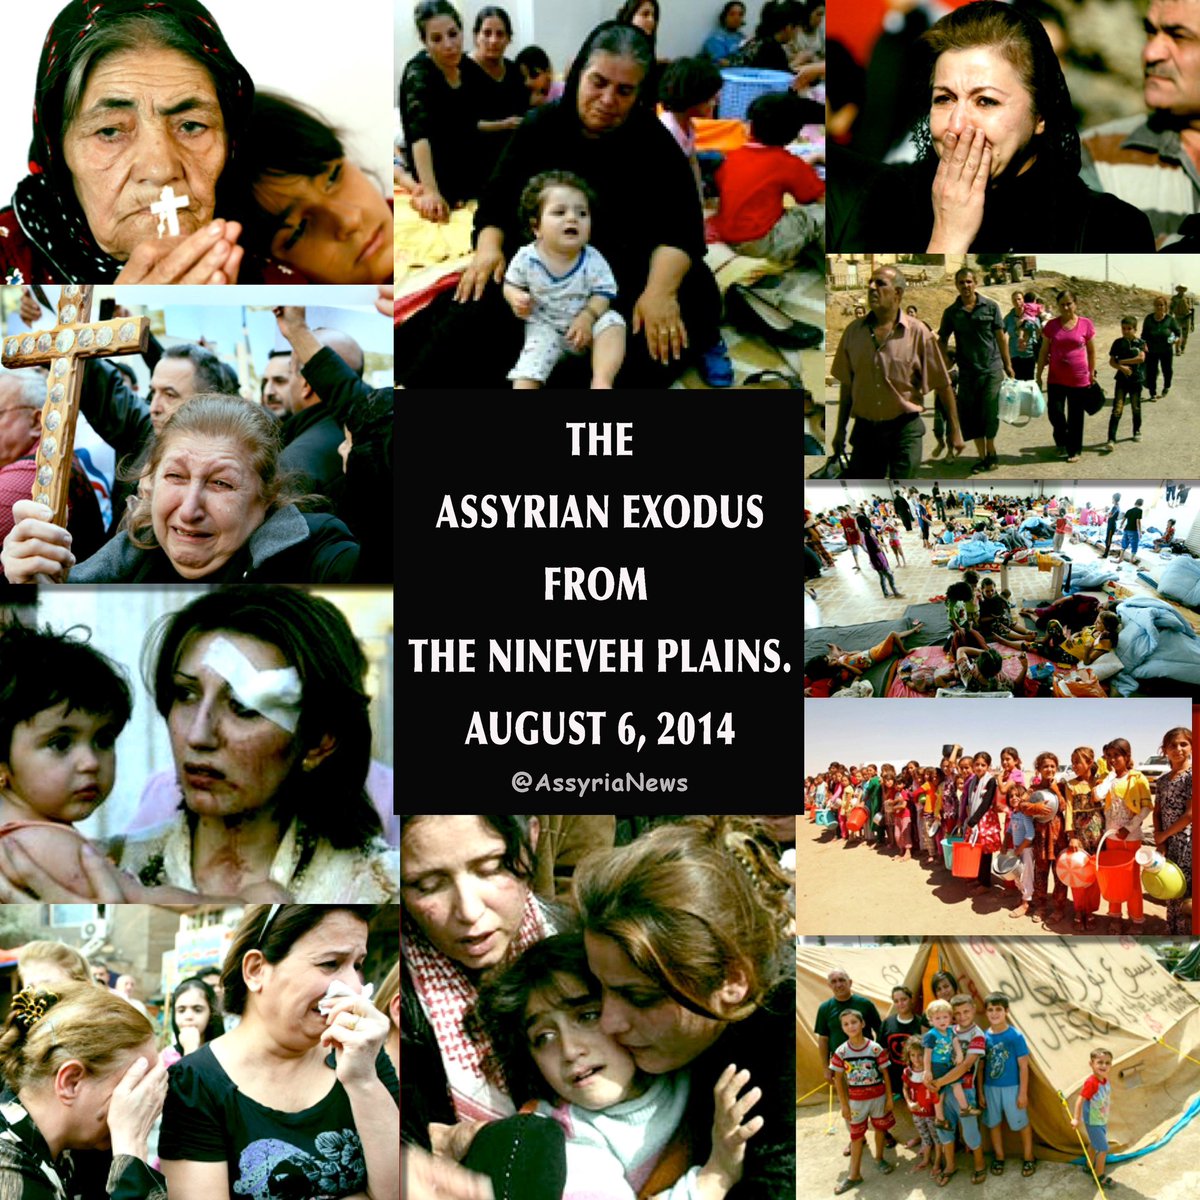 Today commemorates the 9th anniversary of the tragic #Assyrianexodus from the #NinevehPlains, which occurred on August 6, 2014, and led to 200,000 #Assyrians fleeing their homeland #Assyria within the first 24 hours..
#baghdeda #karamlis #bartella #bashiqa #batnaya #telsqof